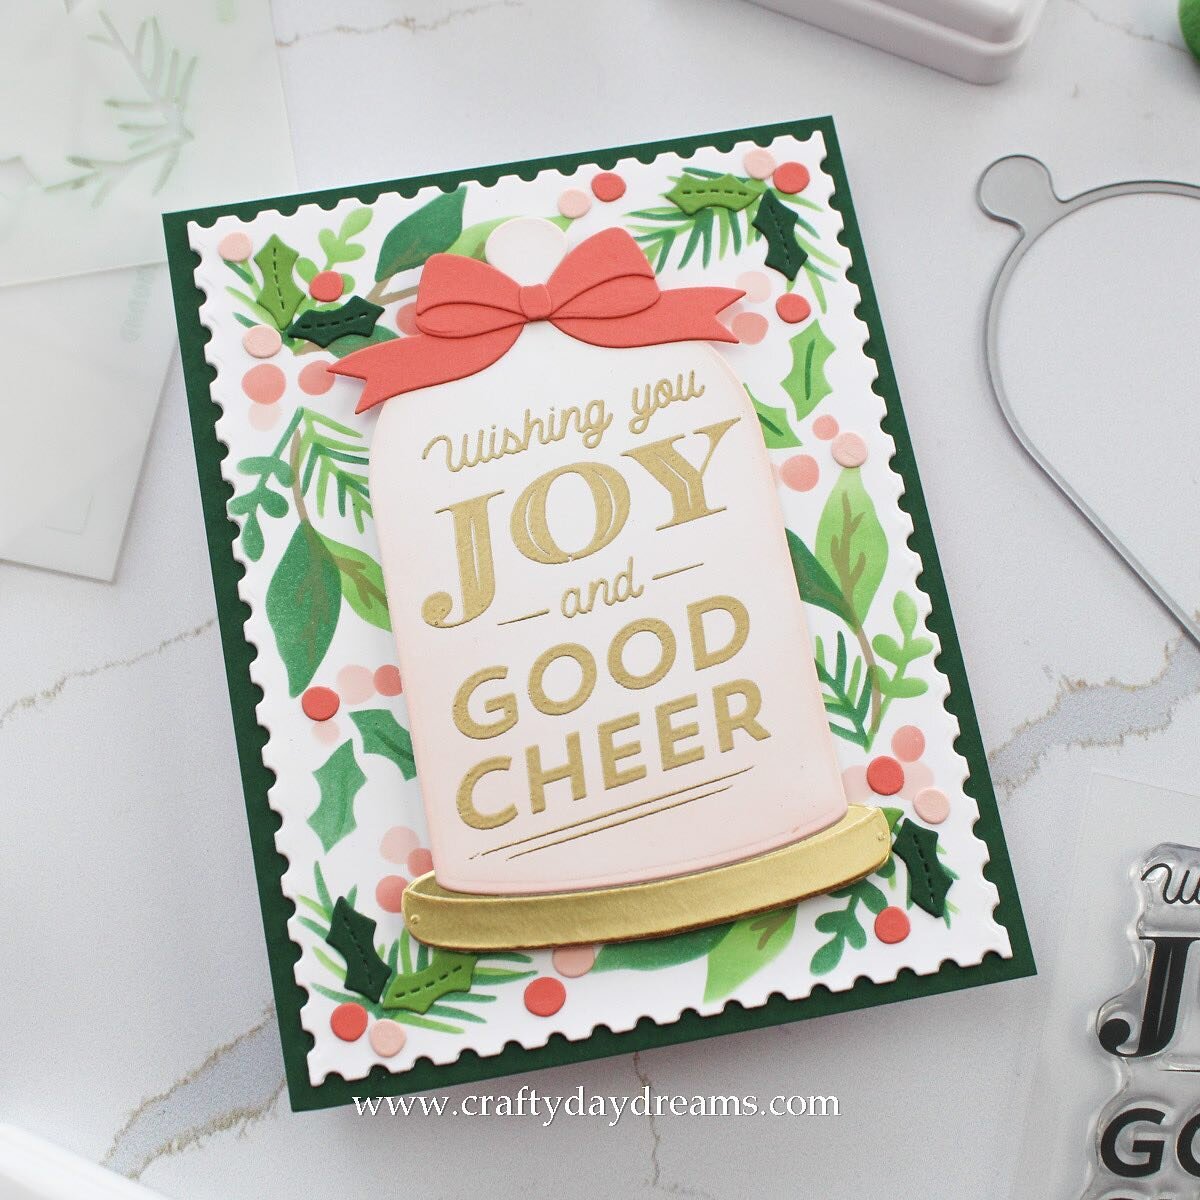 Today I&rsquo;ve got two cards to share using the Christmas Cloche bundle from @concordand9th 😍. When the products were being sneak peeked, I thought the Boughs &amp; Holly stencil pack would look stunning behind a cloche, and I&rsquo;m so glad my i